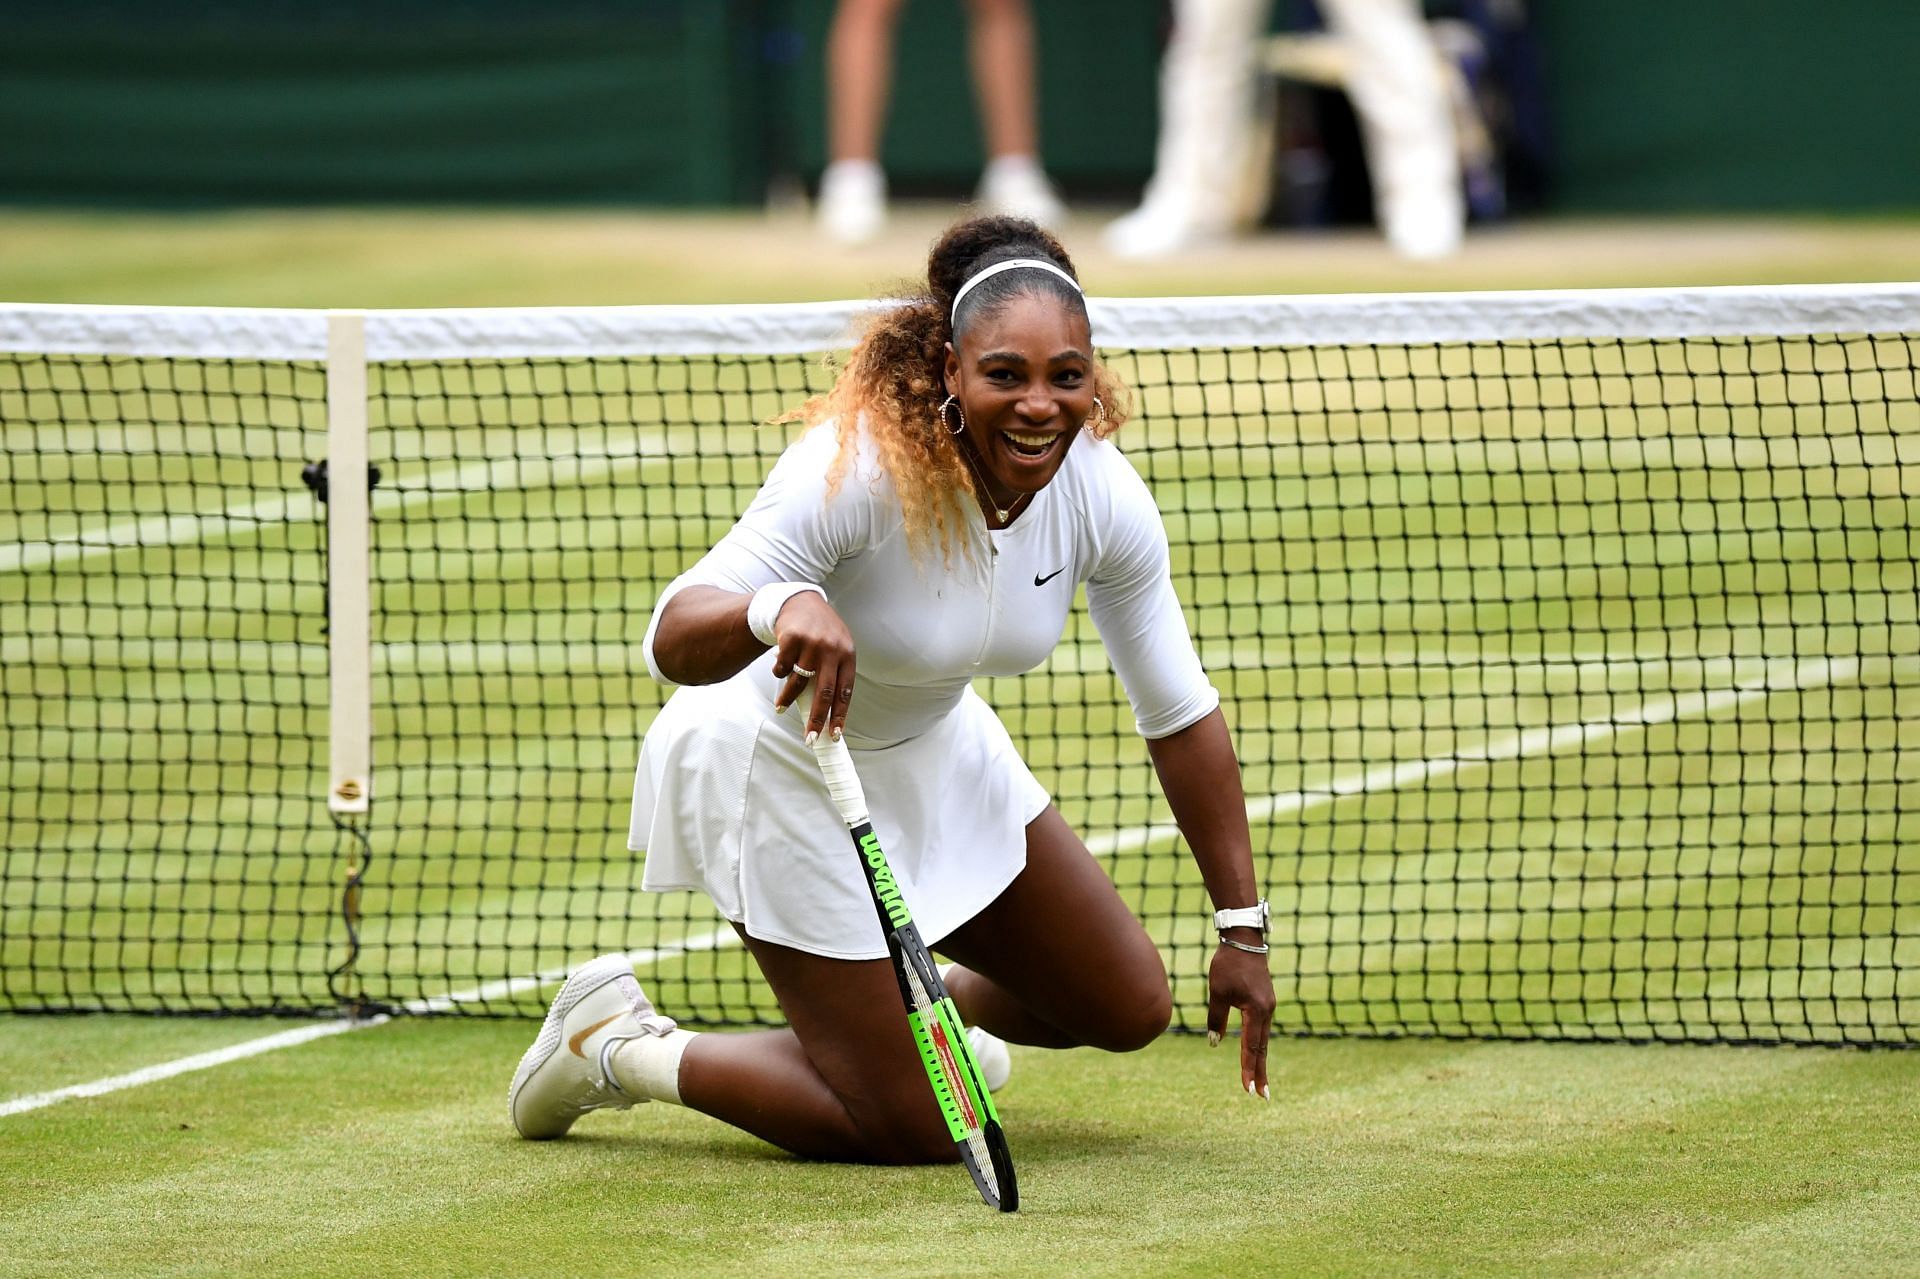 Williams will be looking to make a successful comeback at Wimbledon.